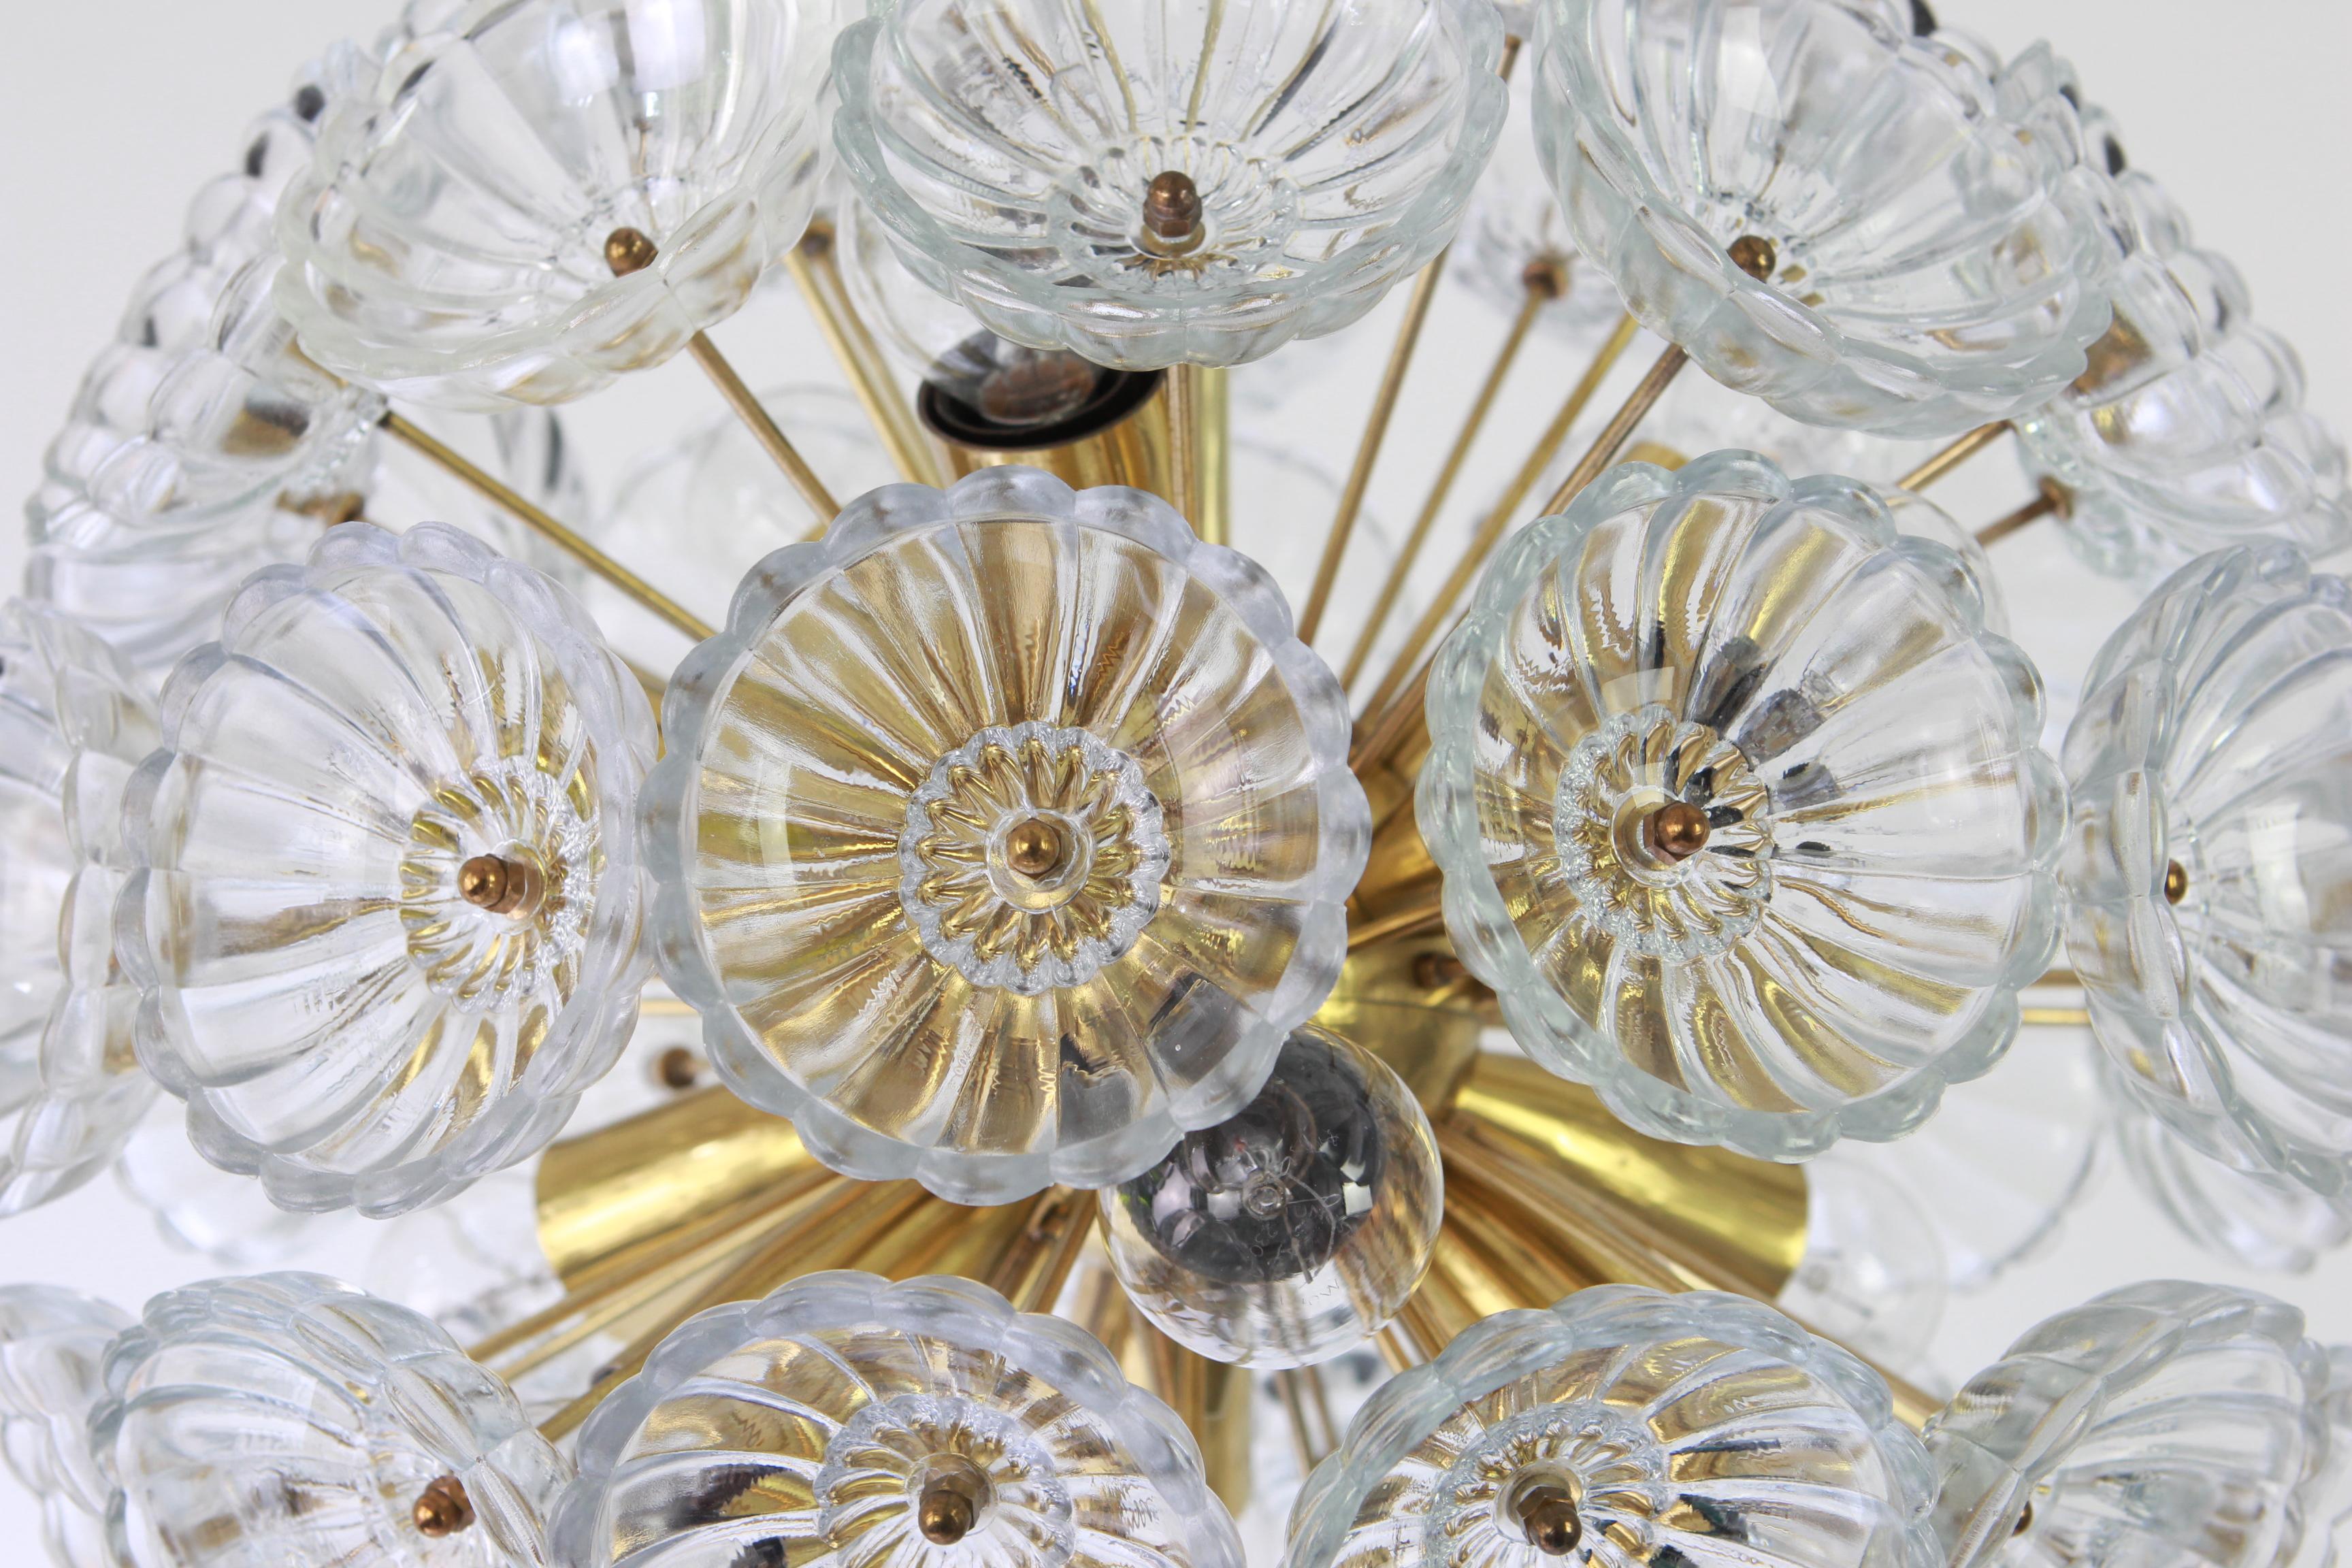 Stunning floral glass and brass Sputnik chandeliers, Germany, 1960s.

It requires 12 x E14 standard bulbs with 40W max each and compatible with the US/UK/ etc. Standards. Very good condition.
Drop rod can be adjusted as required, free of charge,